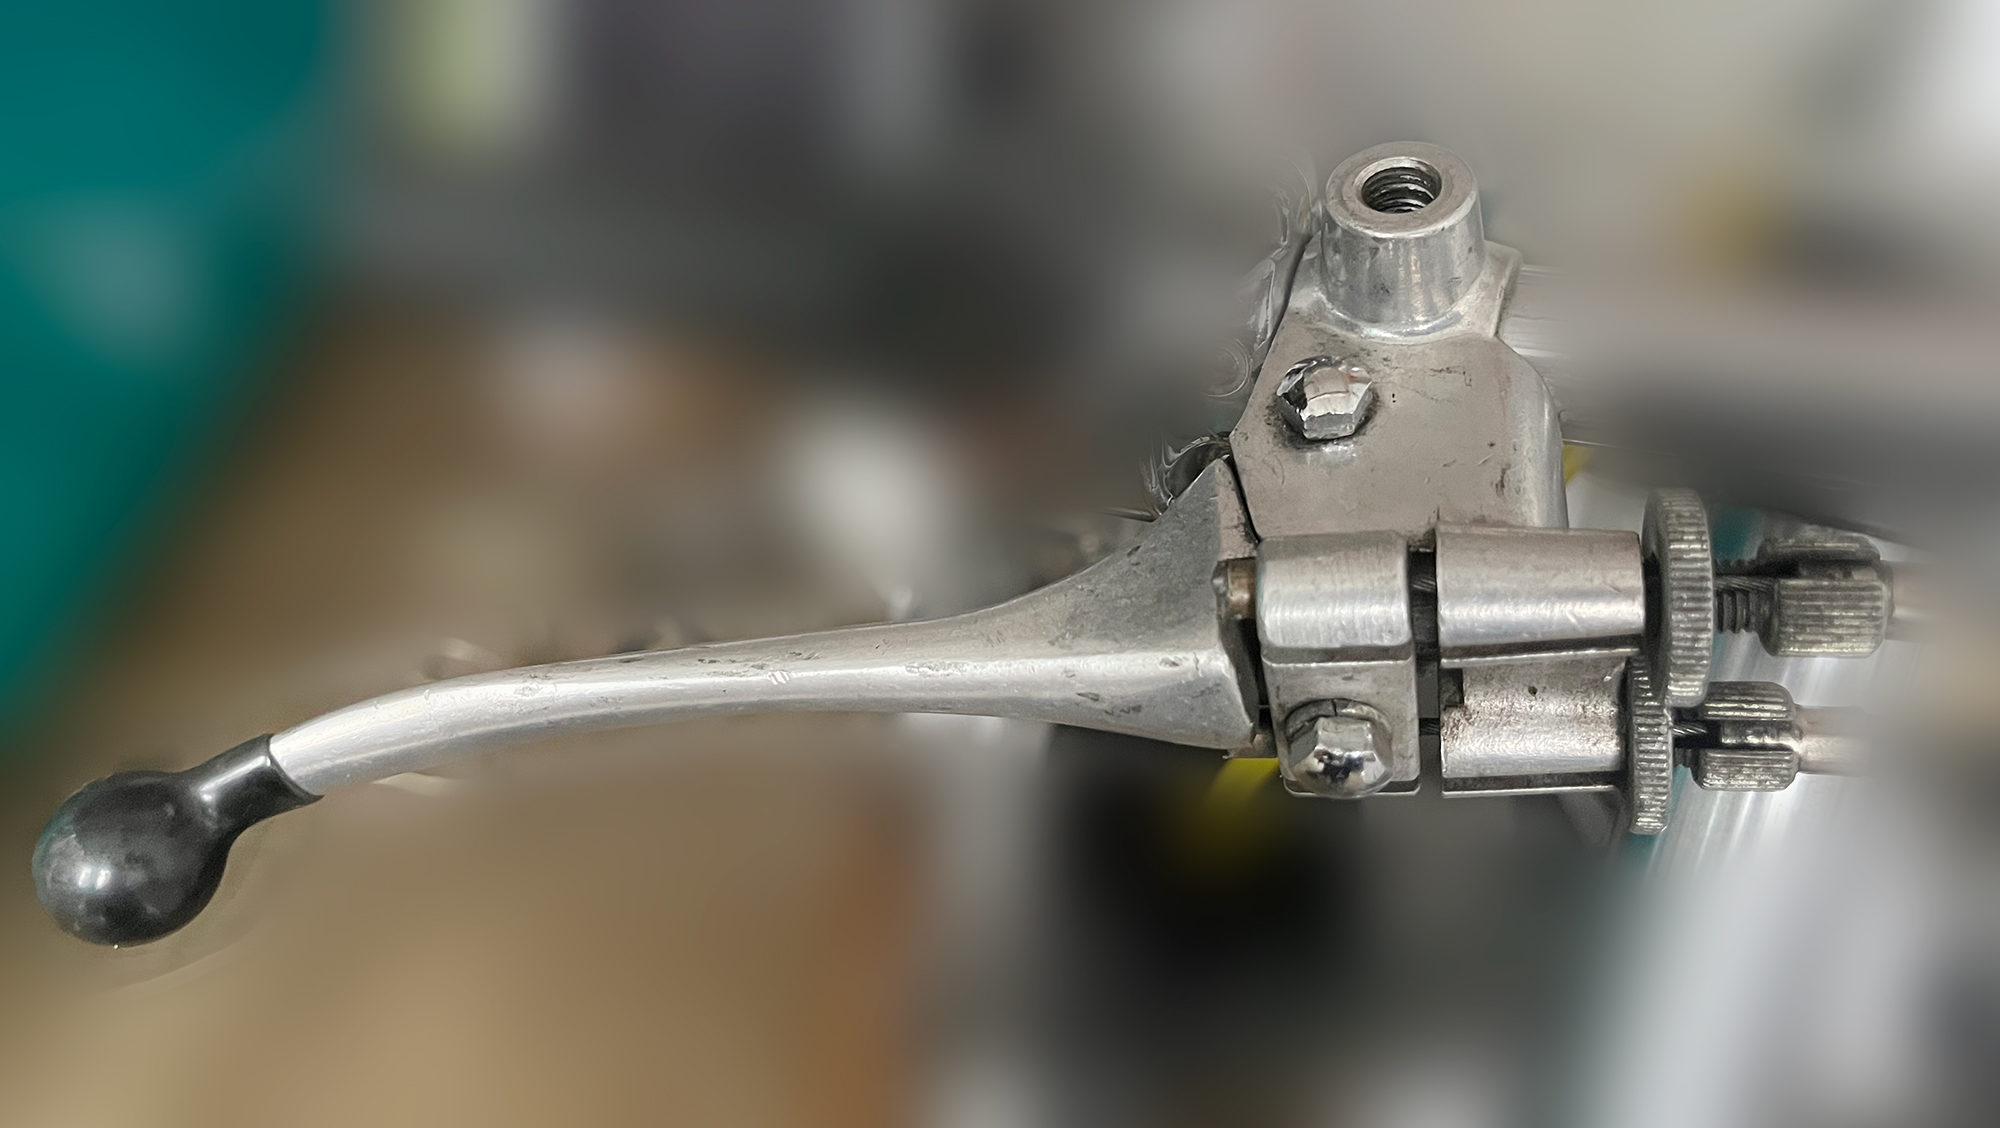 Dual brake lever - what brand is this?